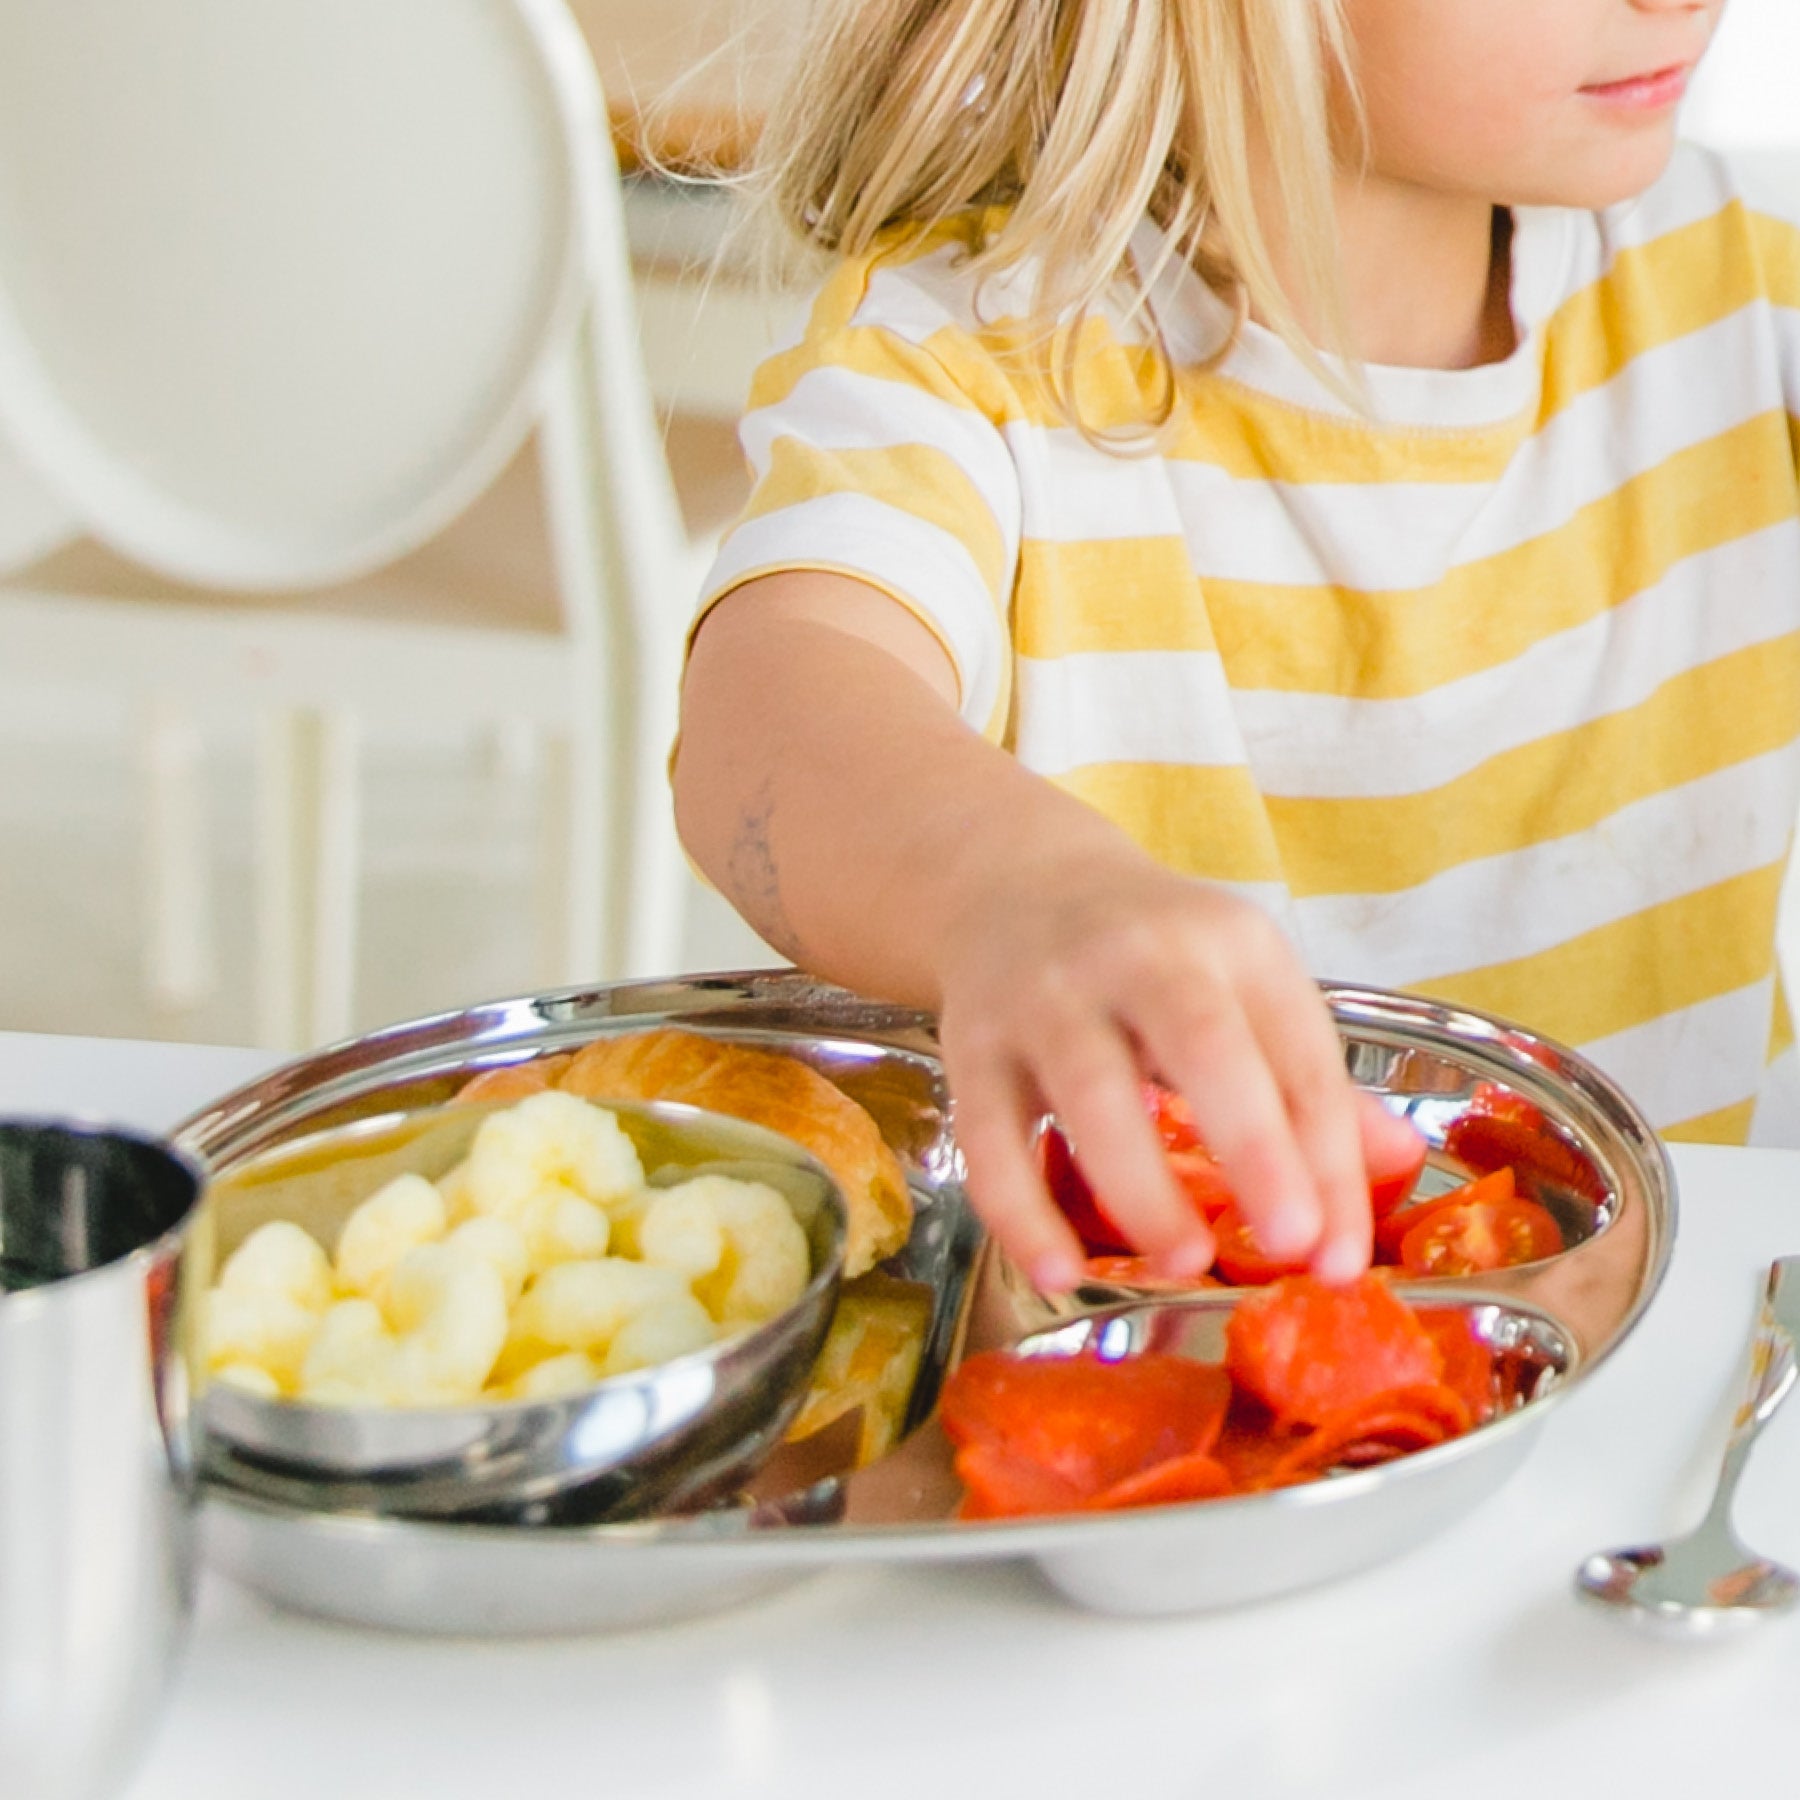 child eating from stainless dish plate